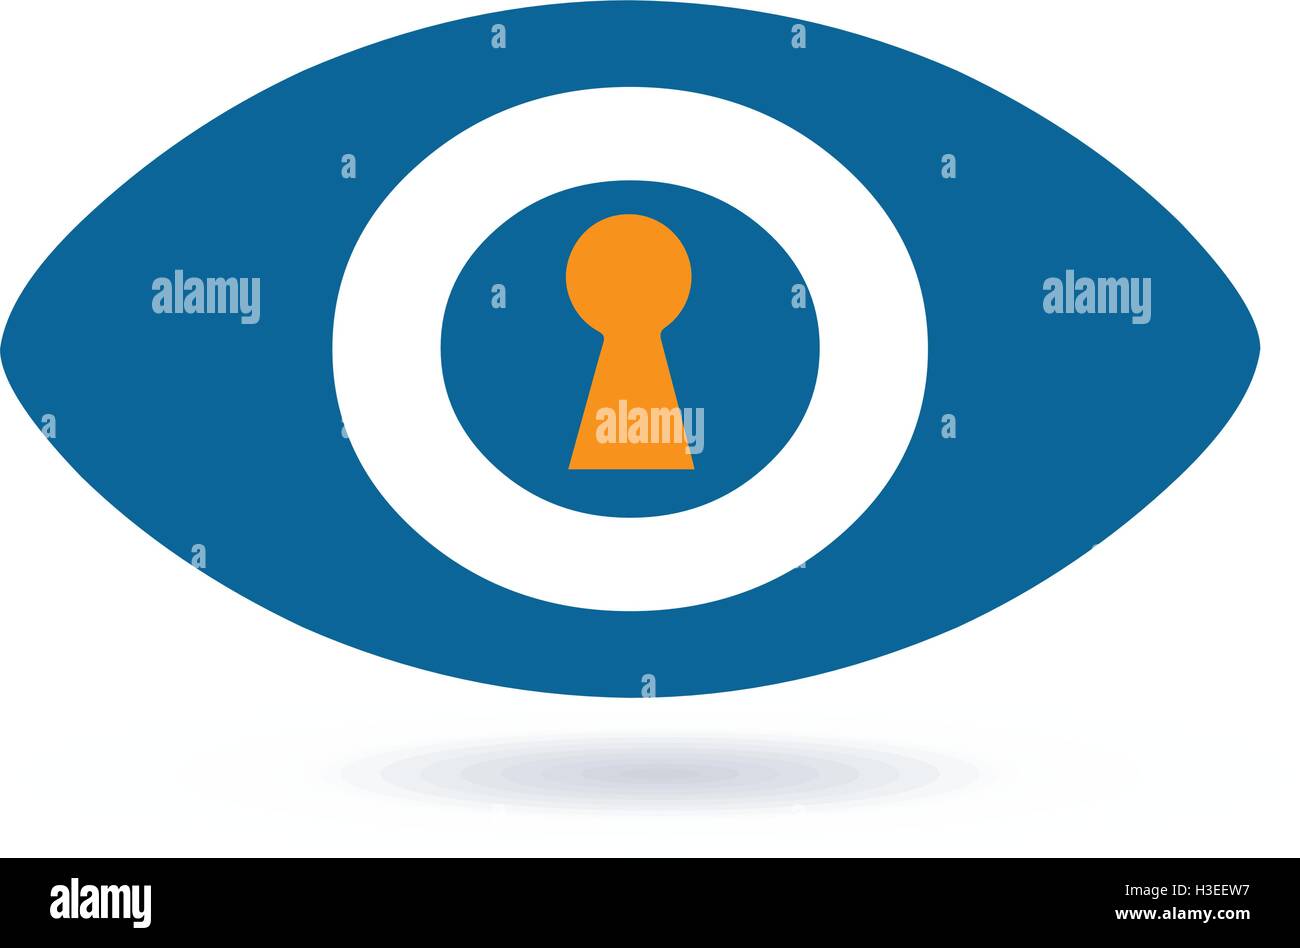 Security Archive Concept With Eye Stock Vector